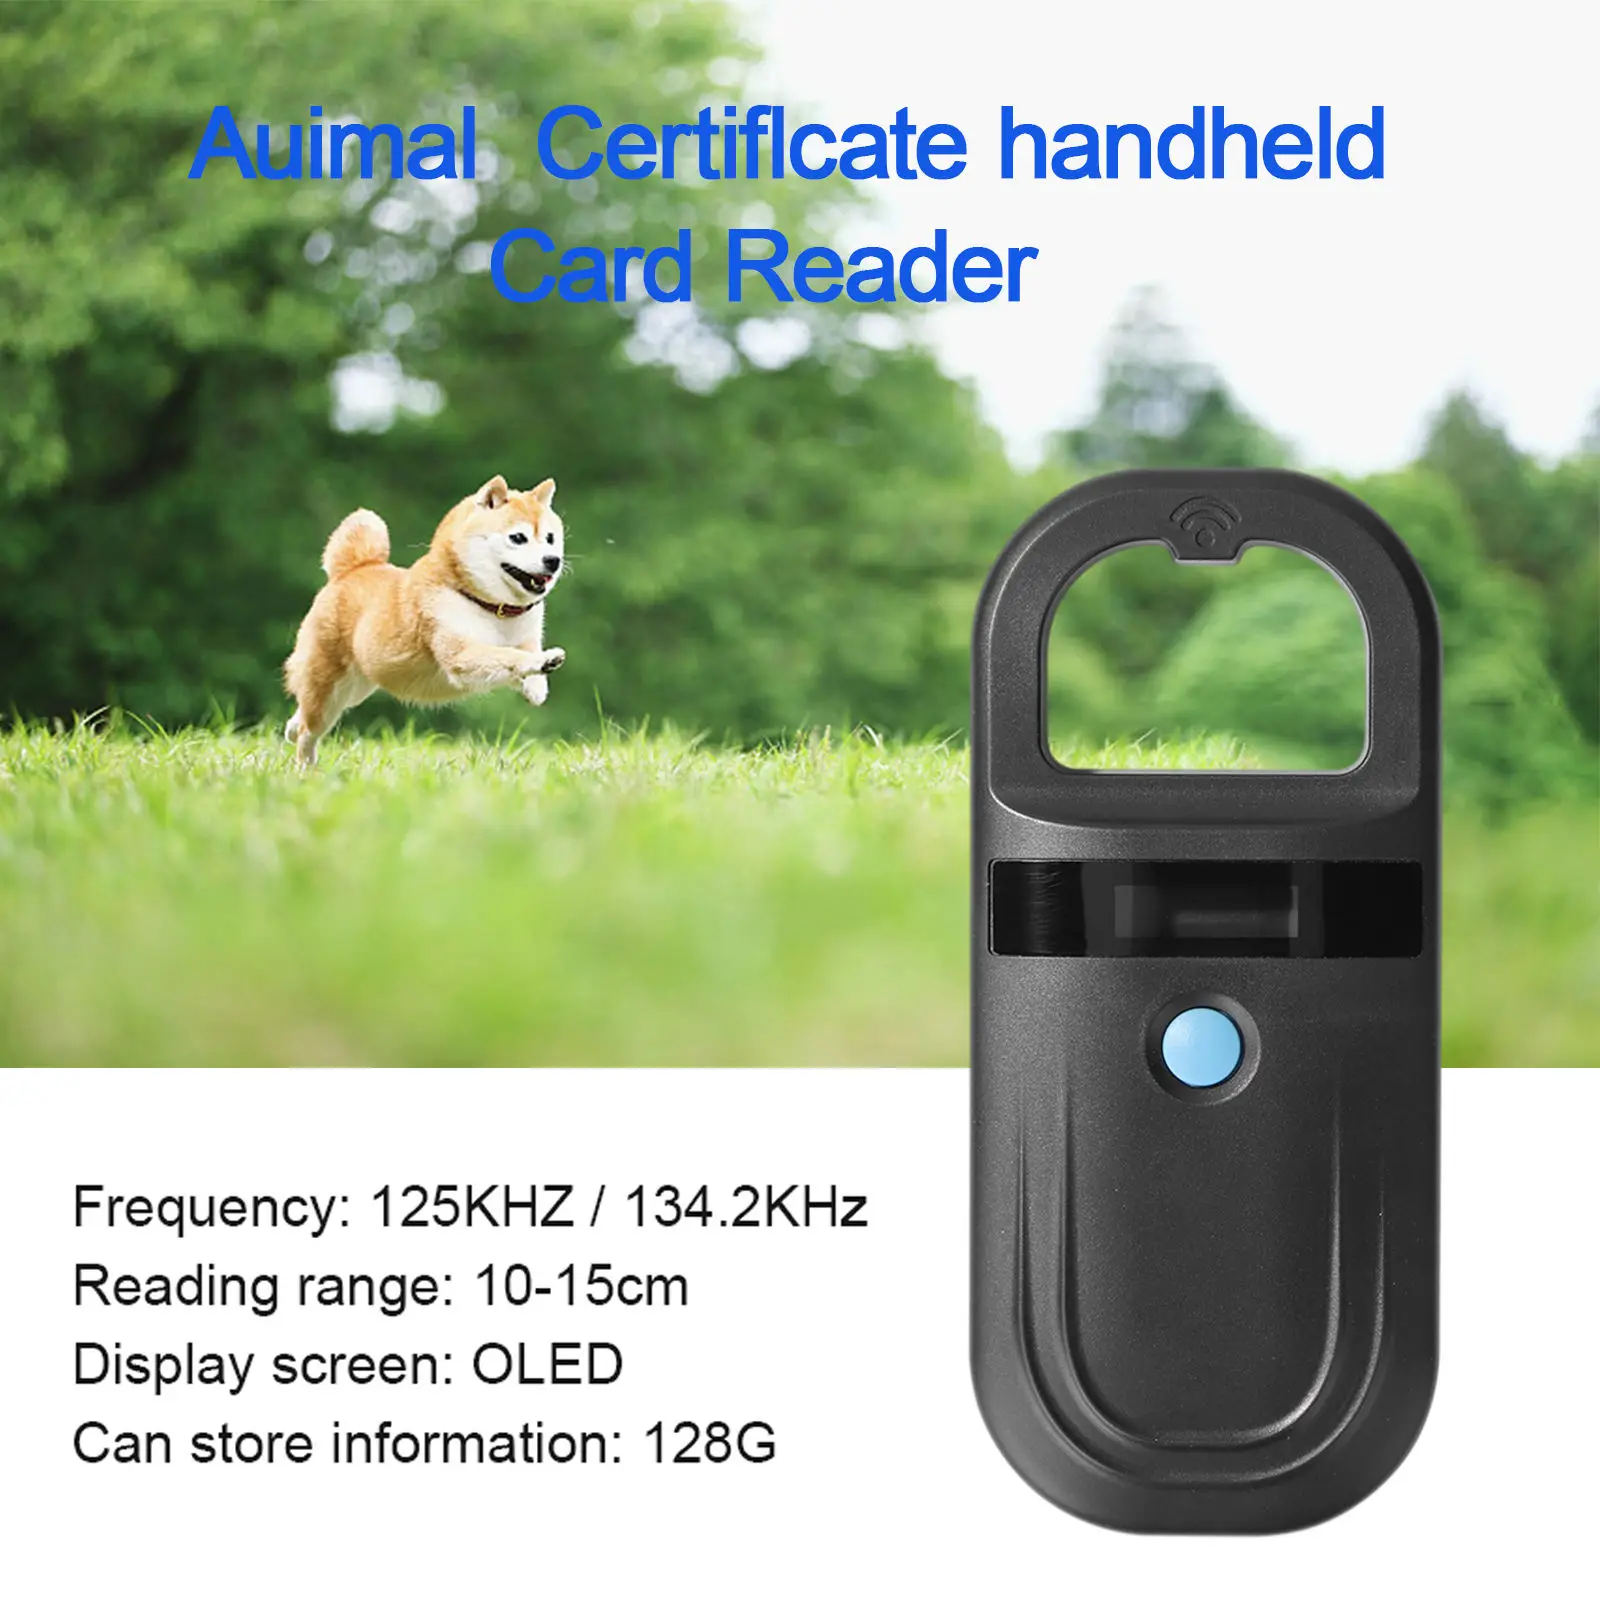 Handheld Pet Scanner 134.2KHz Information Storage RFID Fdx-B Portable Universal Pet ID Microchip Scanner for Dogs Horse Tracking